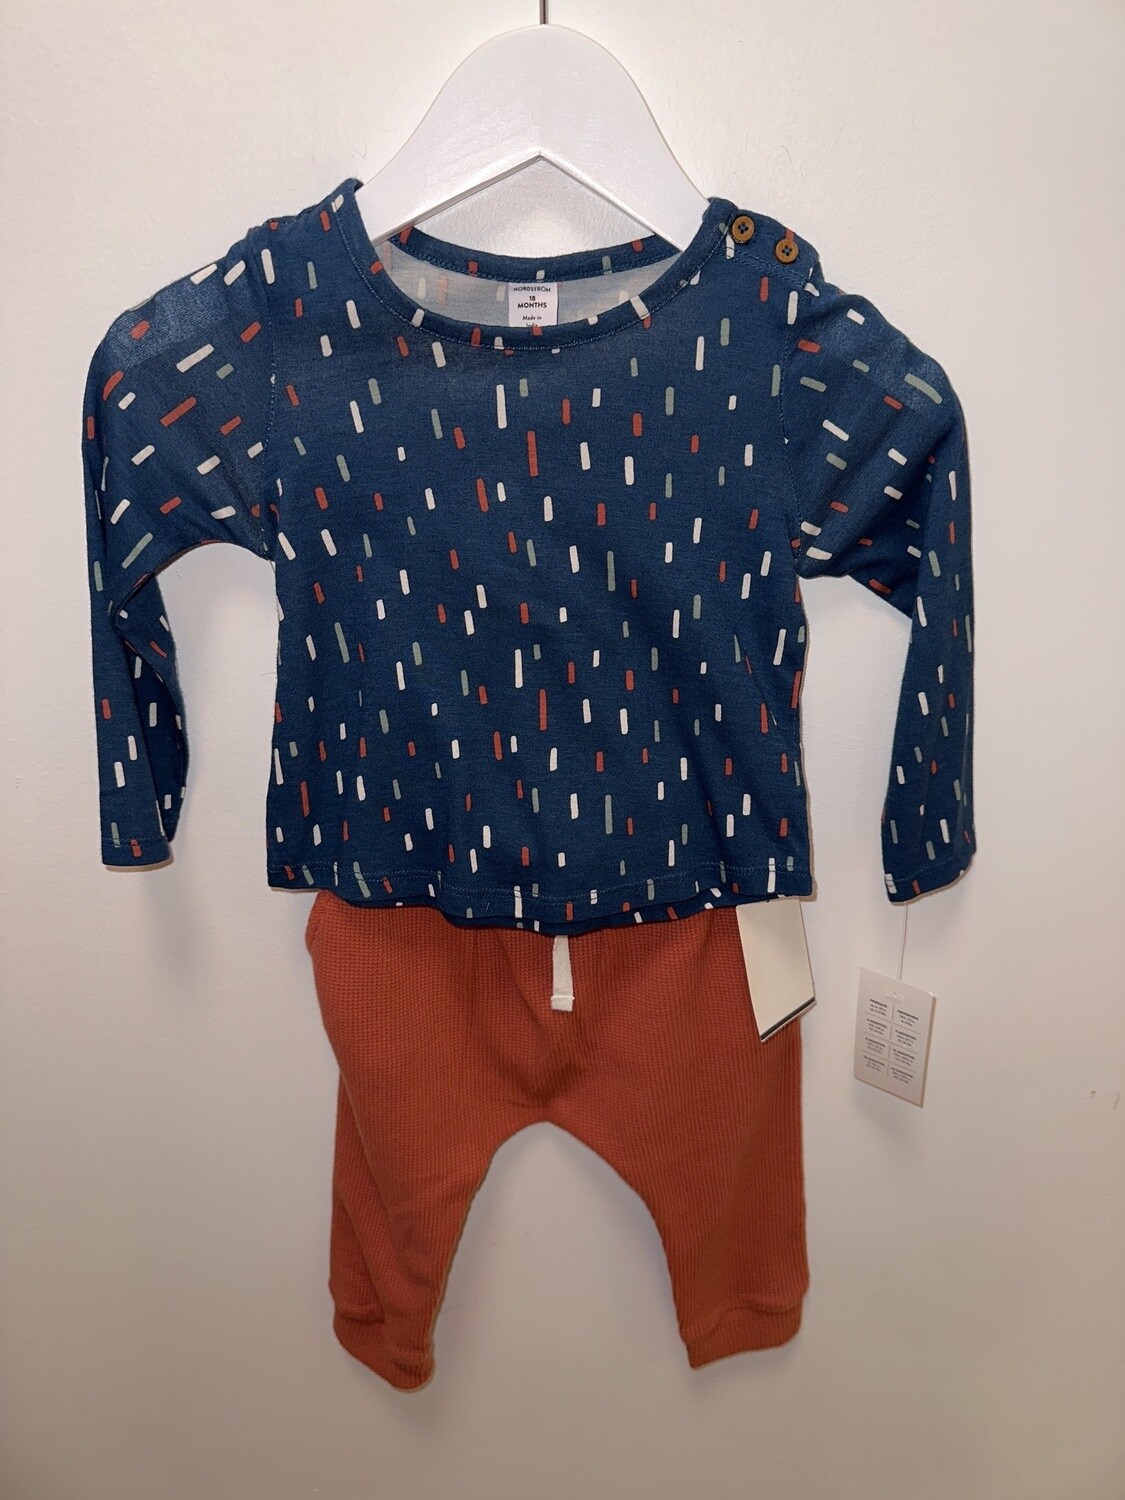 New with Tags - Nordstrom - Long Sleeve - 18 months - PWE35